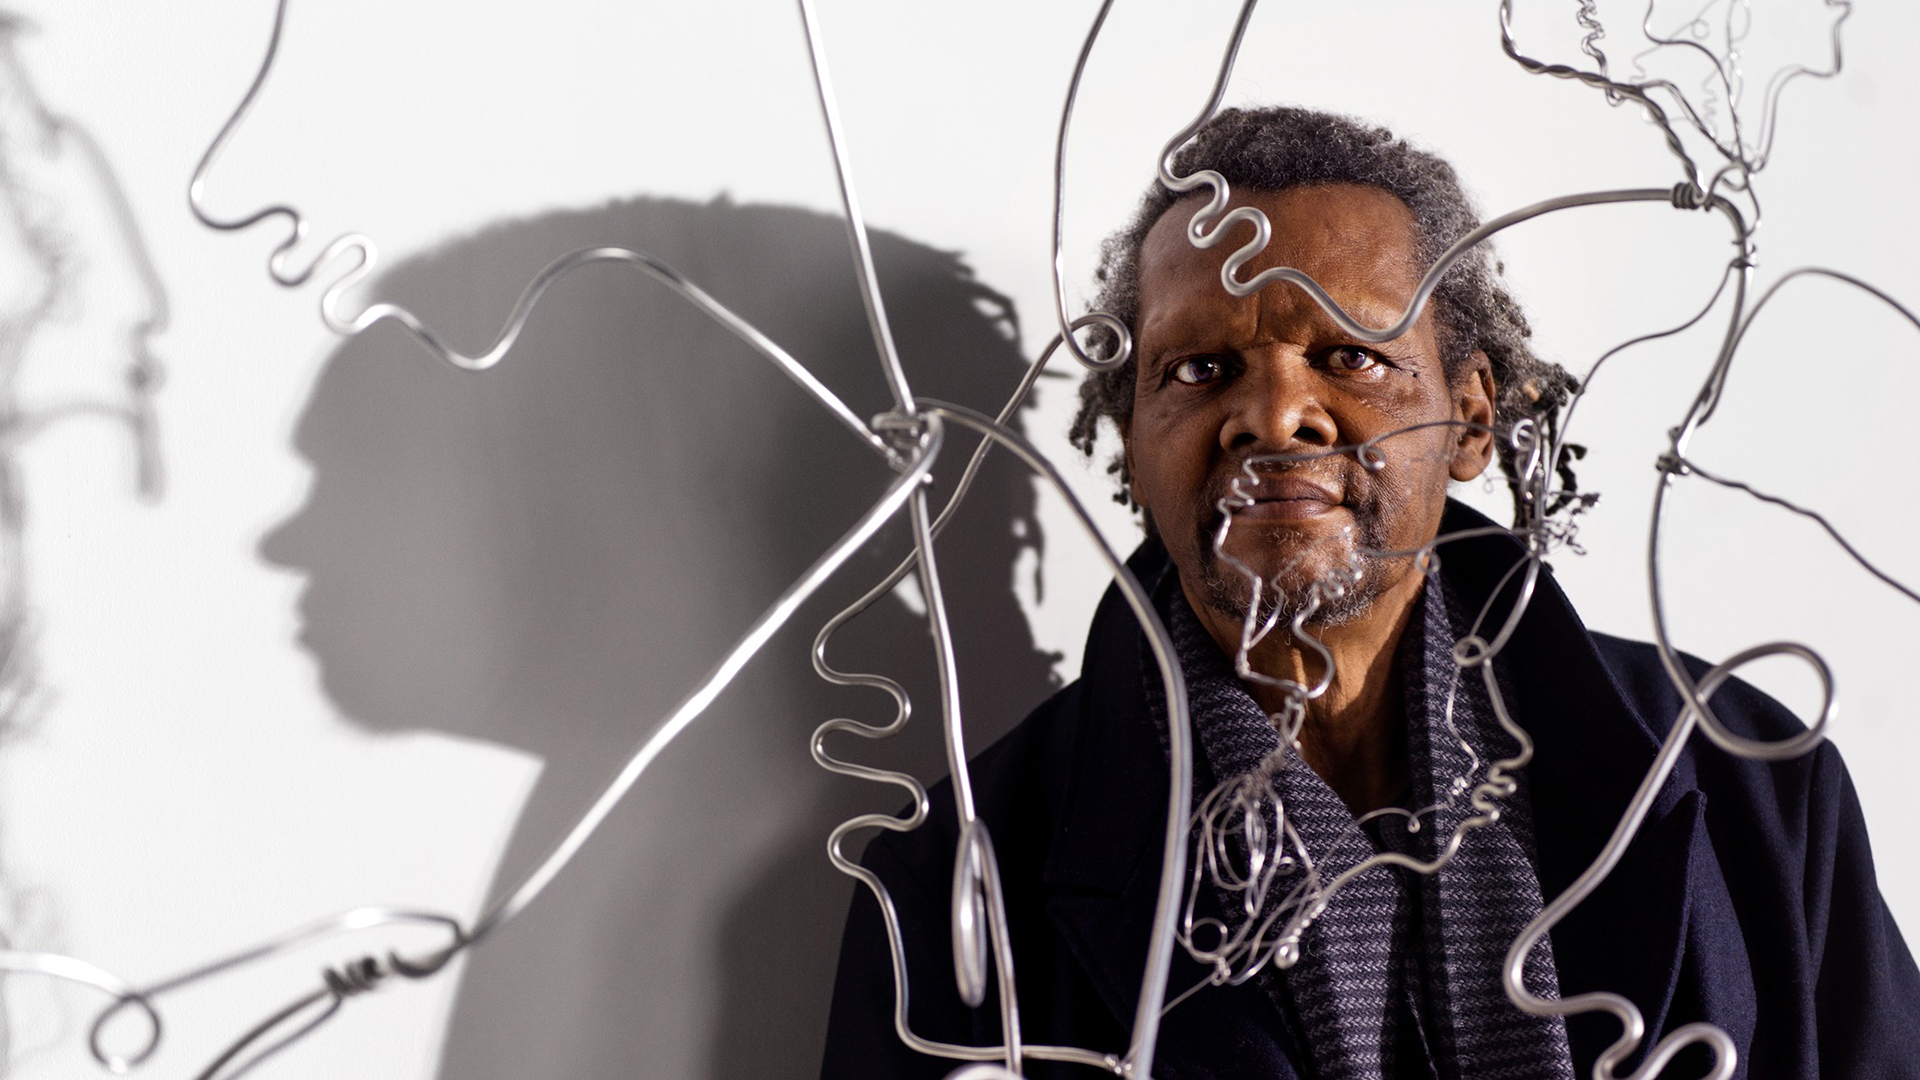 Lonnie Holley behind one of his sculptures (photograph by David Raccuglia)